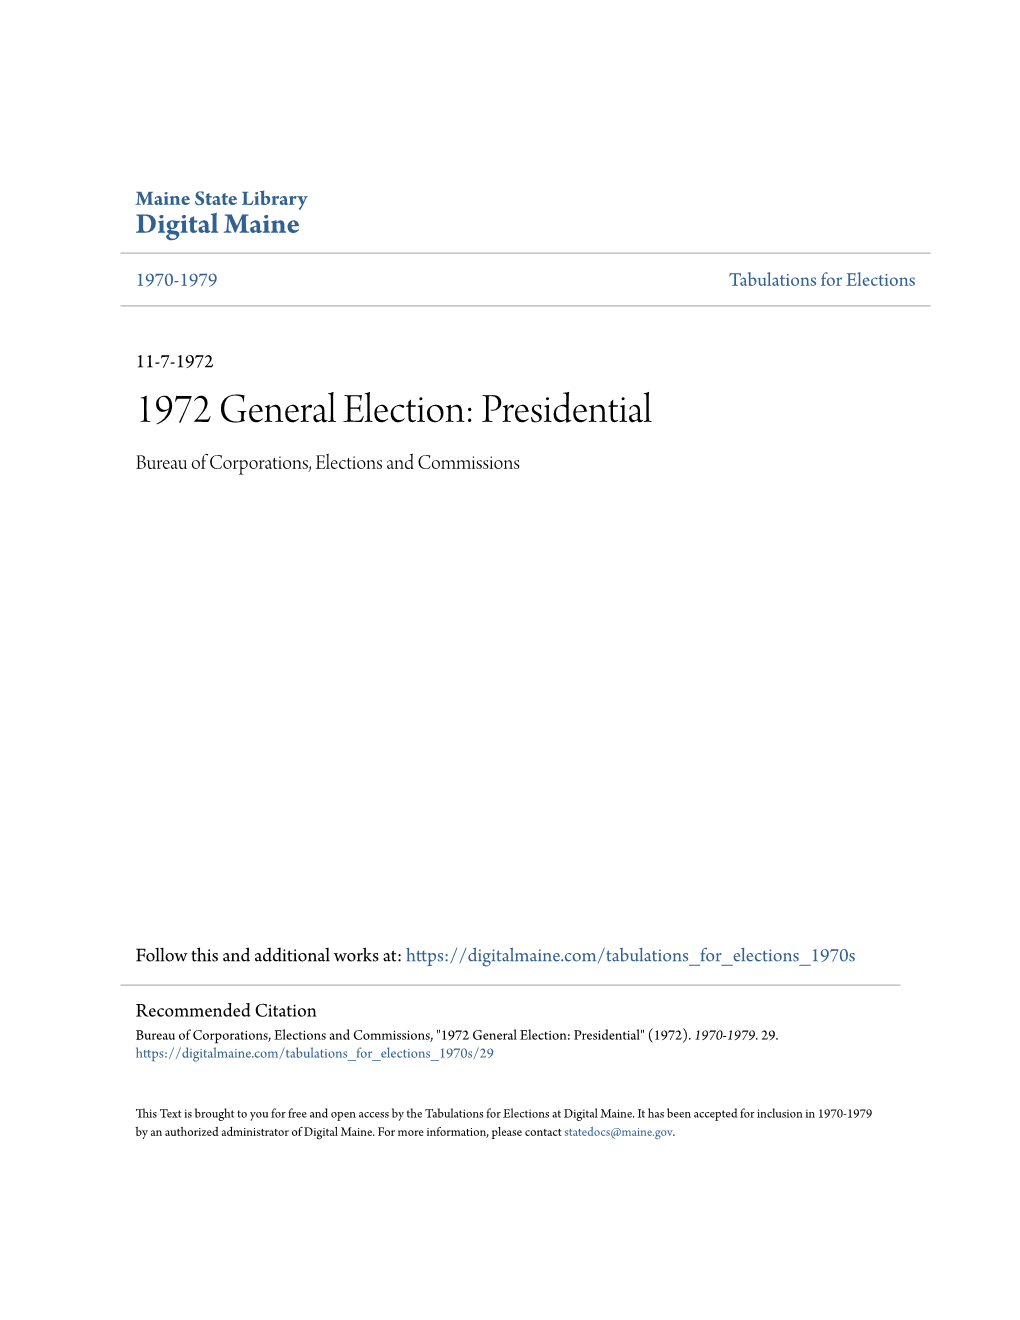 1972 General Election: Presidential Bureau of Corporations, Elections and Commissions